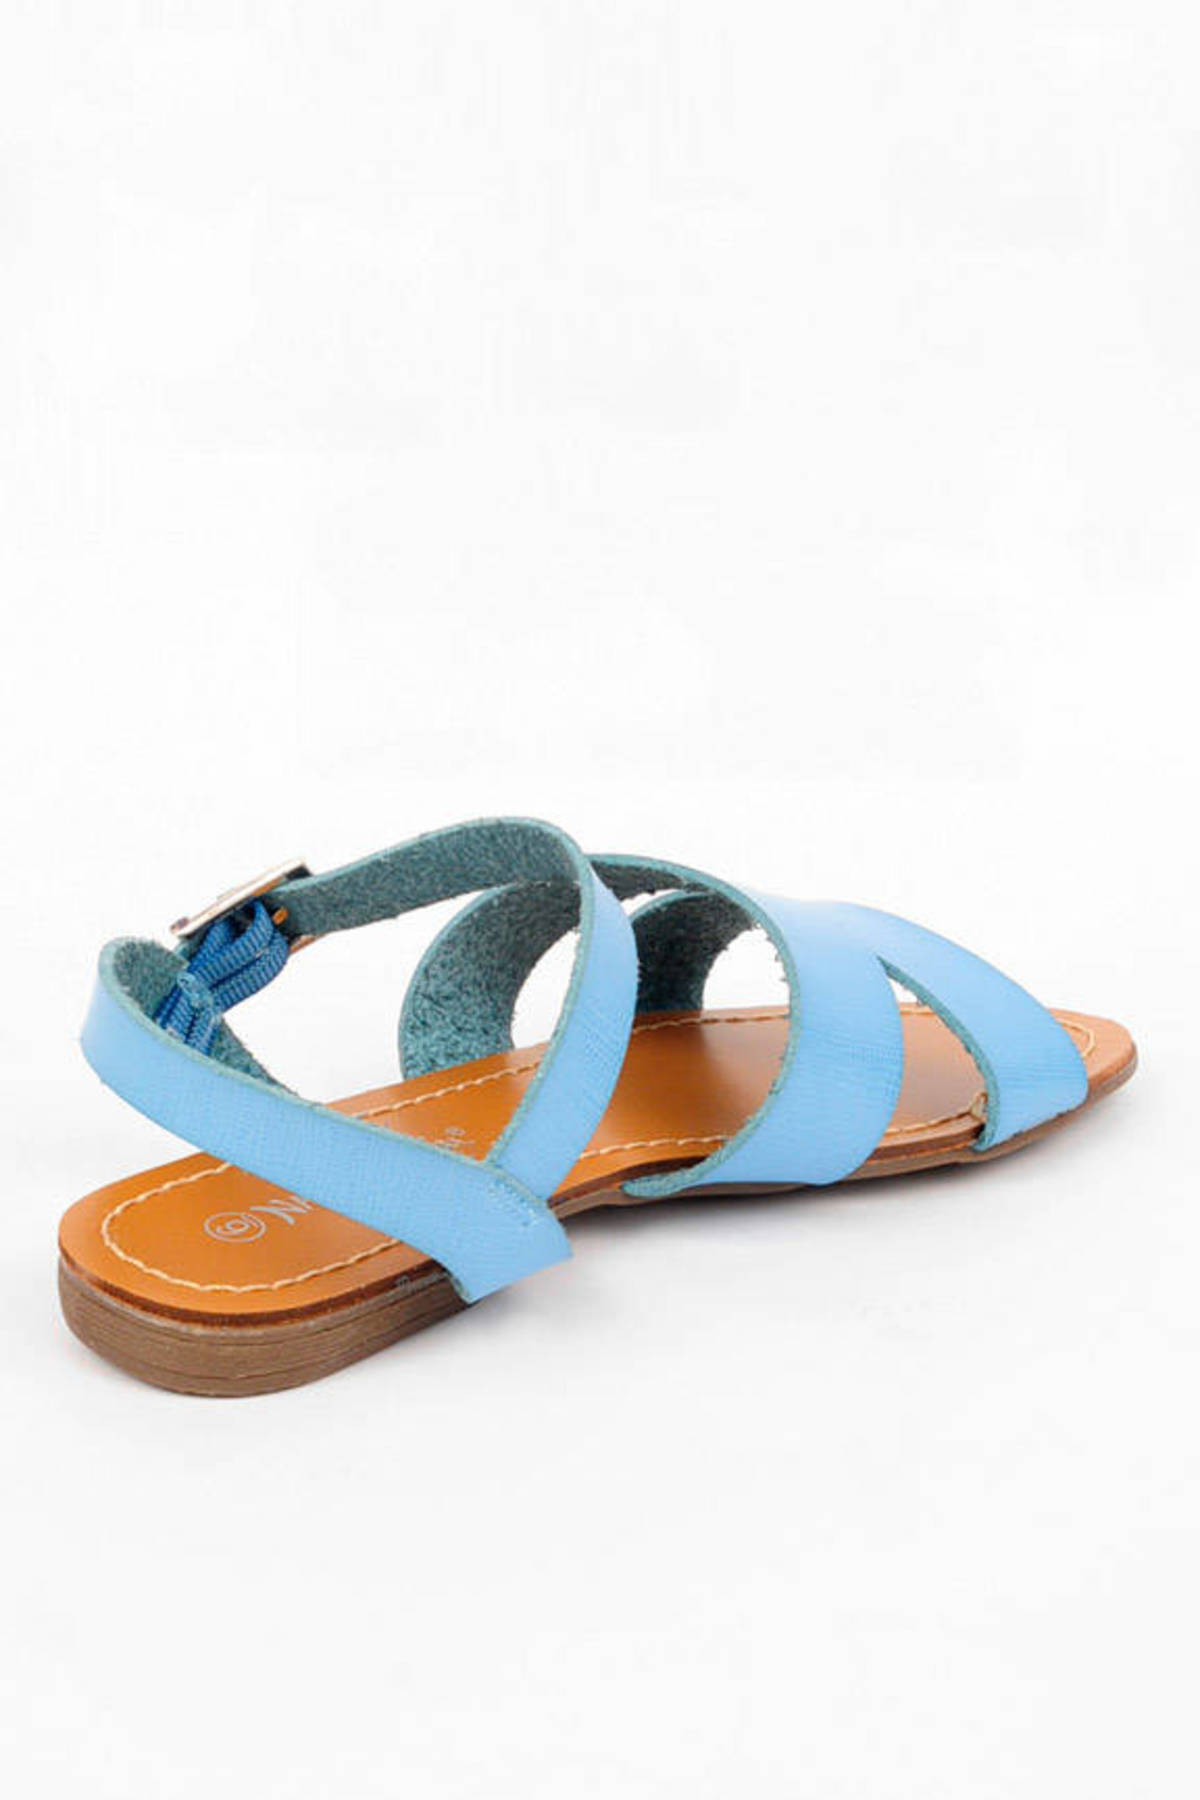 Amber Cut Out Sandals in Light Blue - $12 | Tobi US